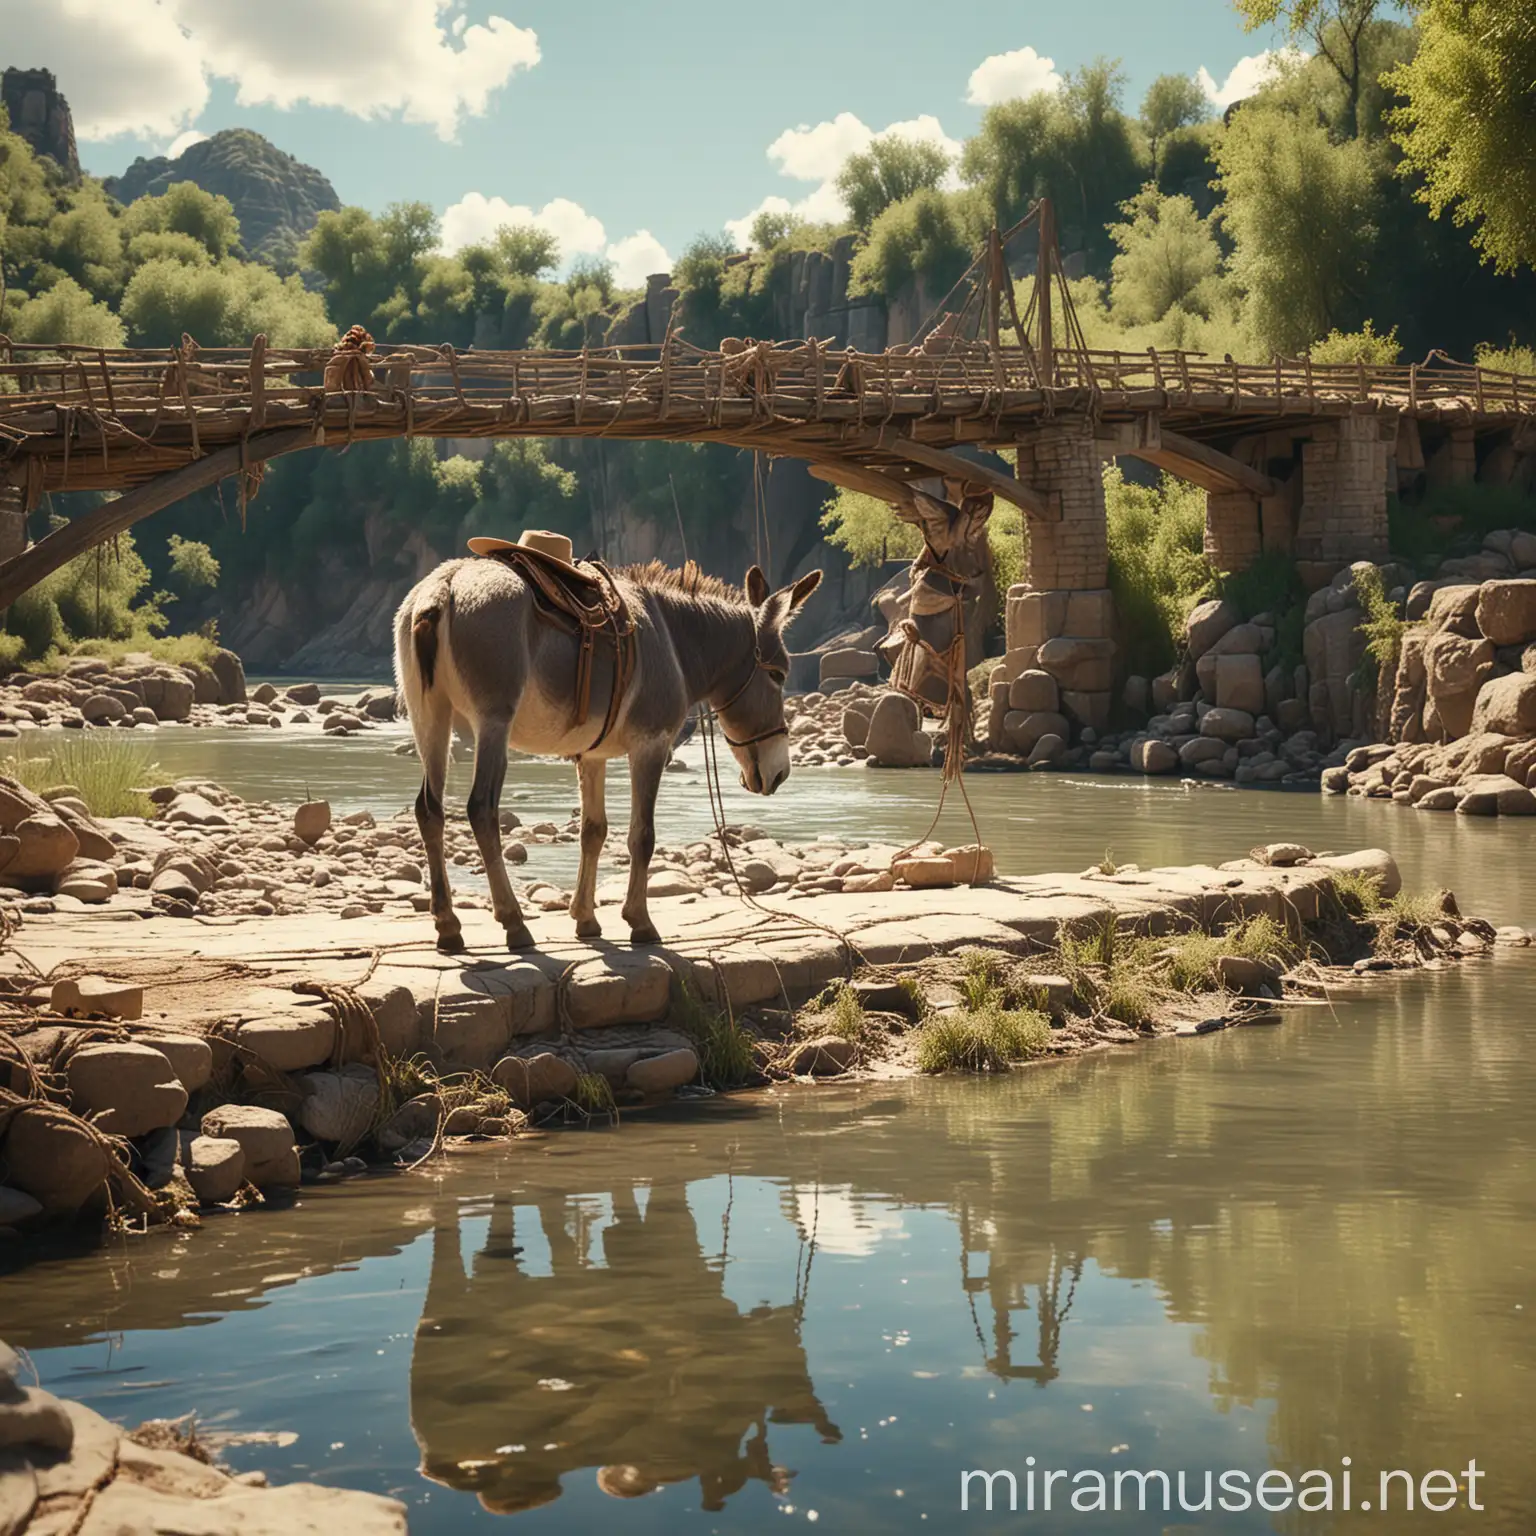 Old Man with Hat Watching Donkey Drink by Bridge on Sunny Day Pixar Mode